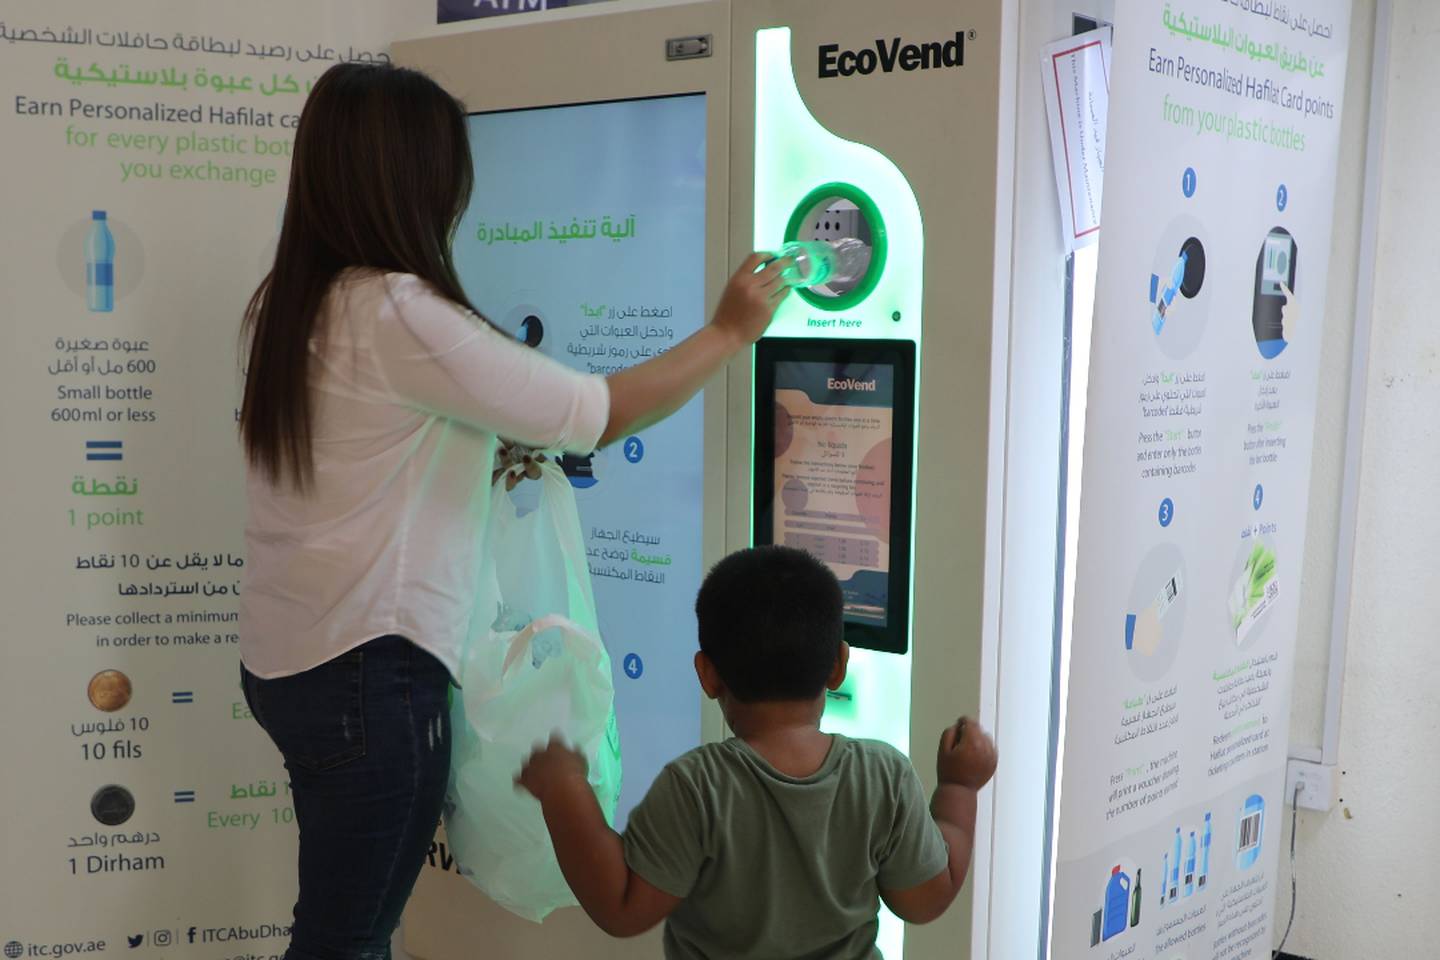 How to recycle plastic bottles to earn free bus rides in Abu Dhabi